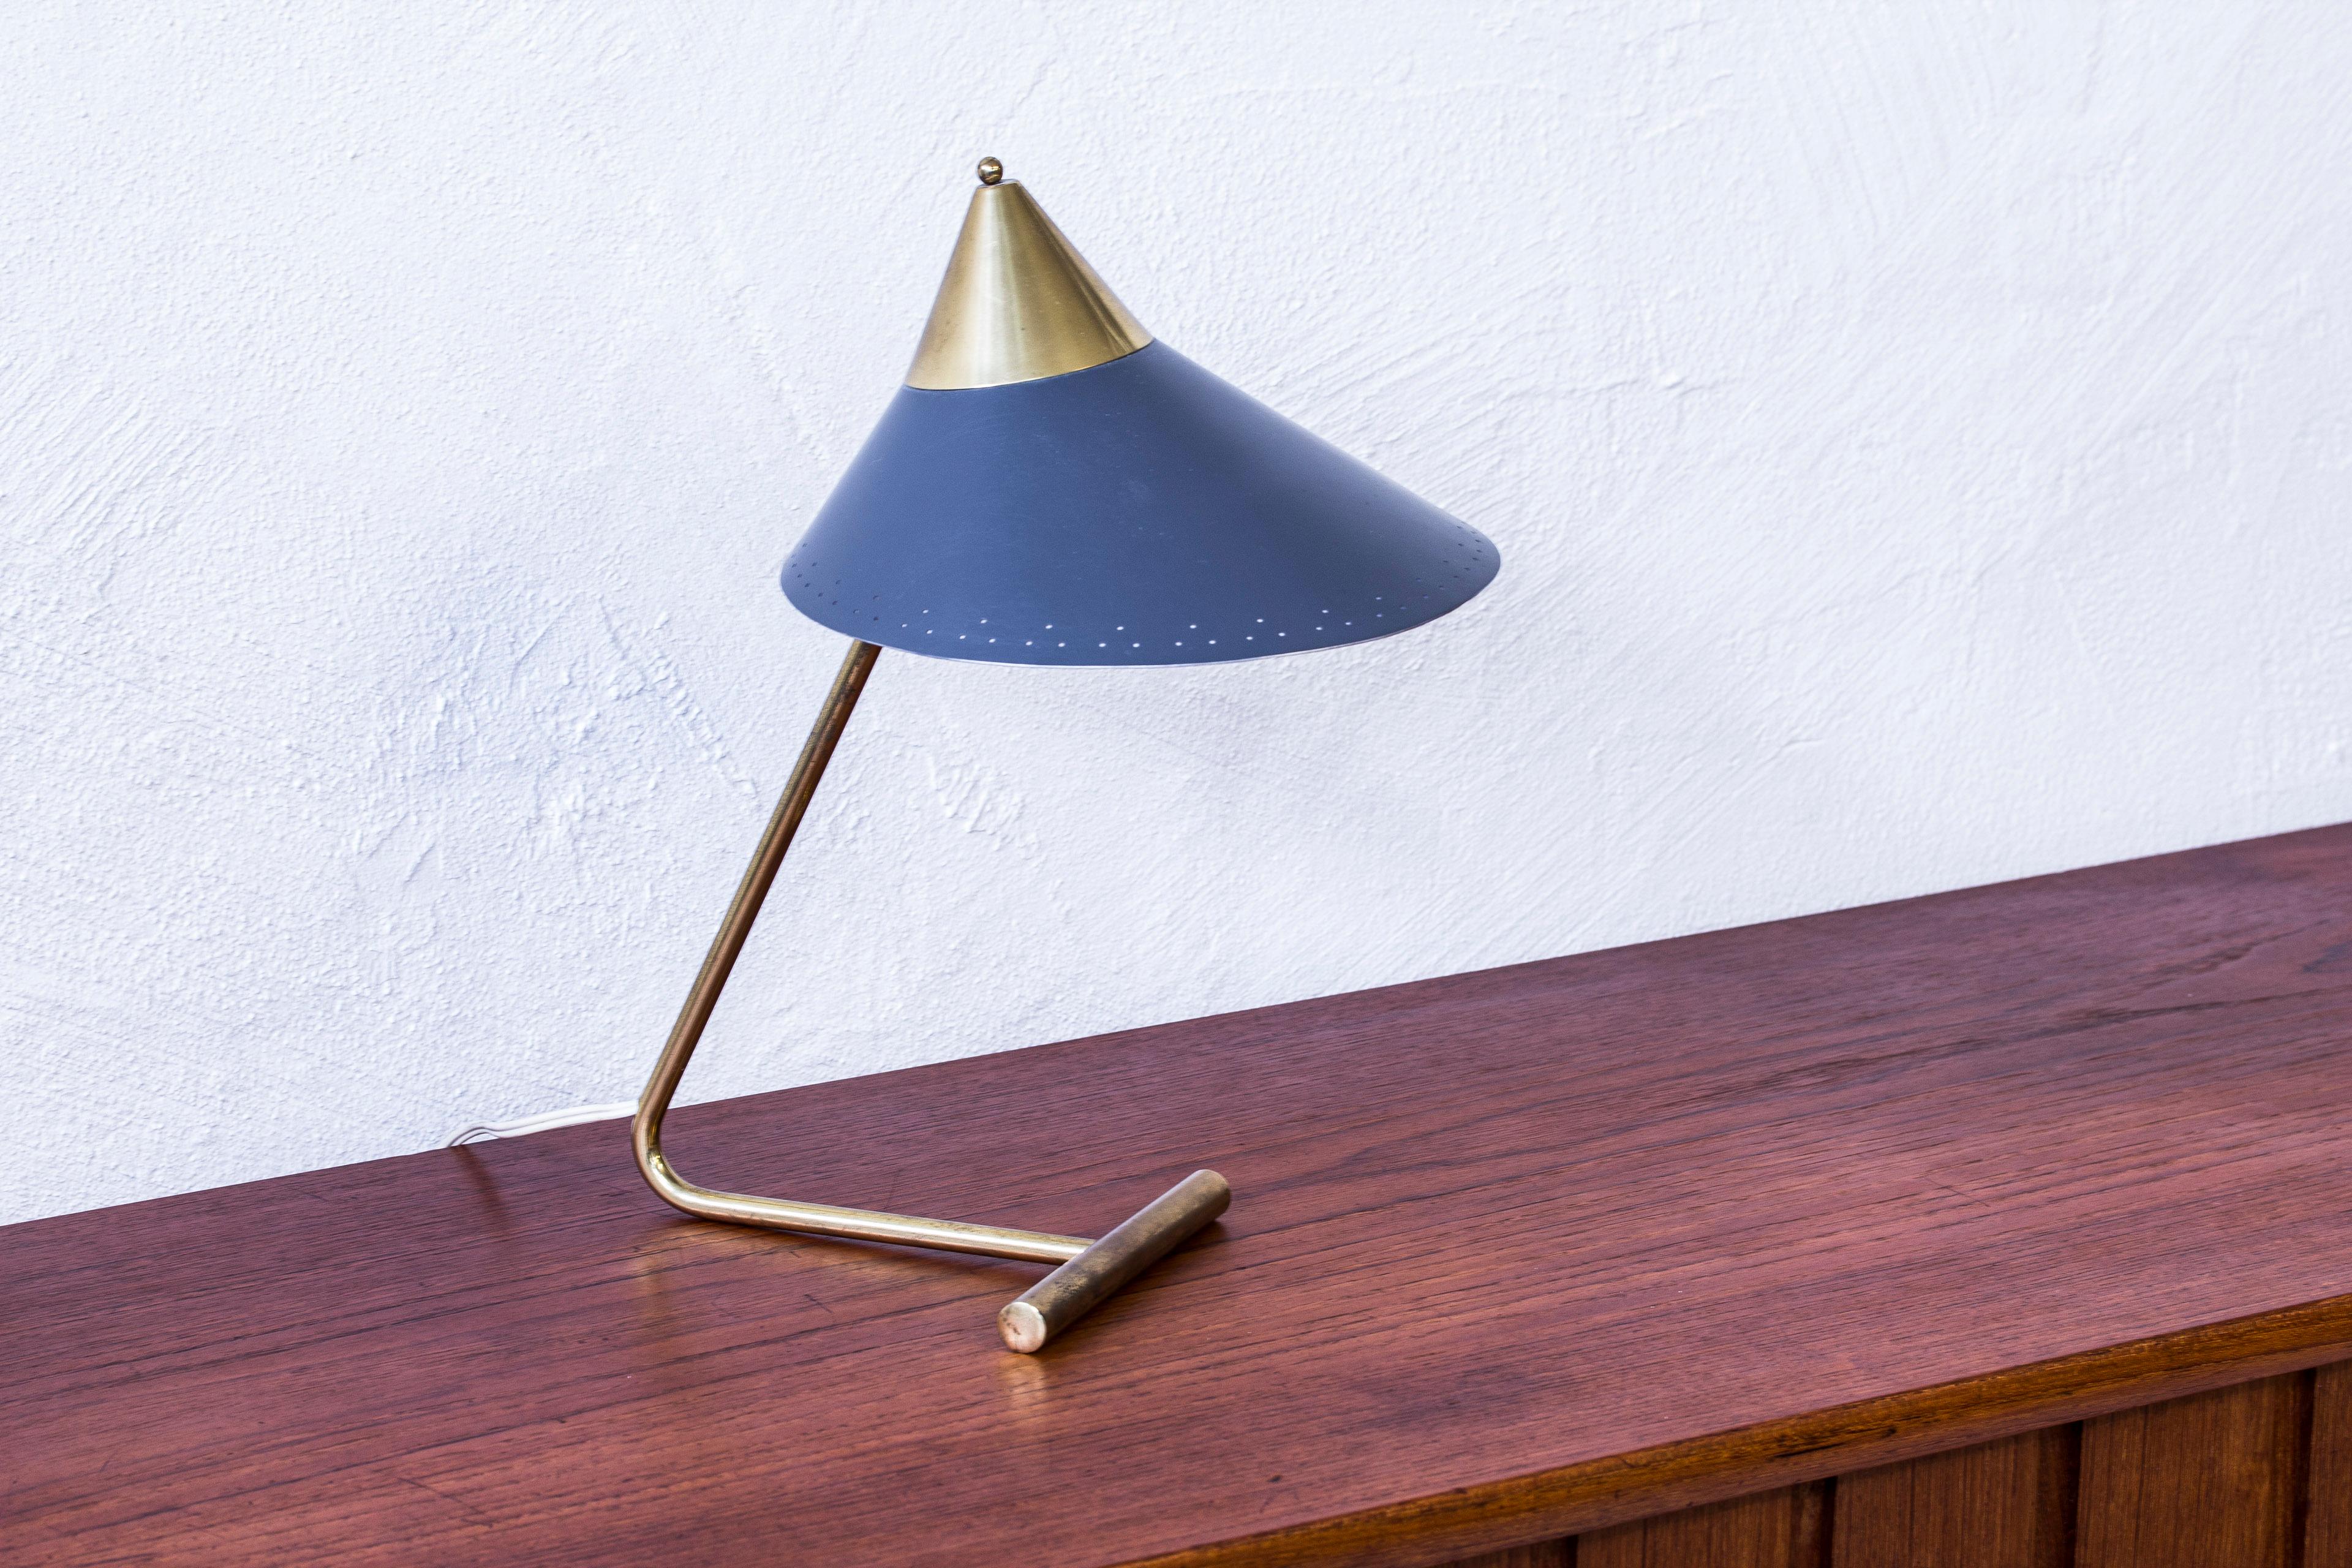 Table lamp designed by Svend Aage Holm Sørensen. Produced by his own company in Denmark during the 1950s. Made from polished brass with a grey lacquered metal shade. Light switch on the chord. Very good condition with few signs of wear and light age